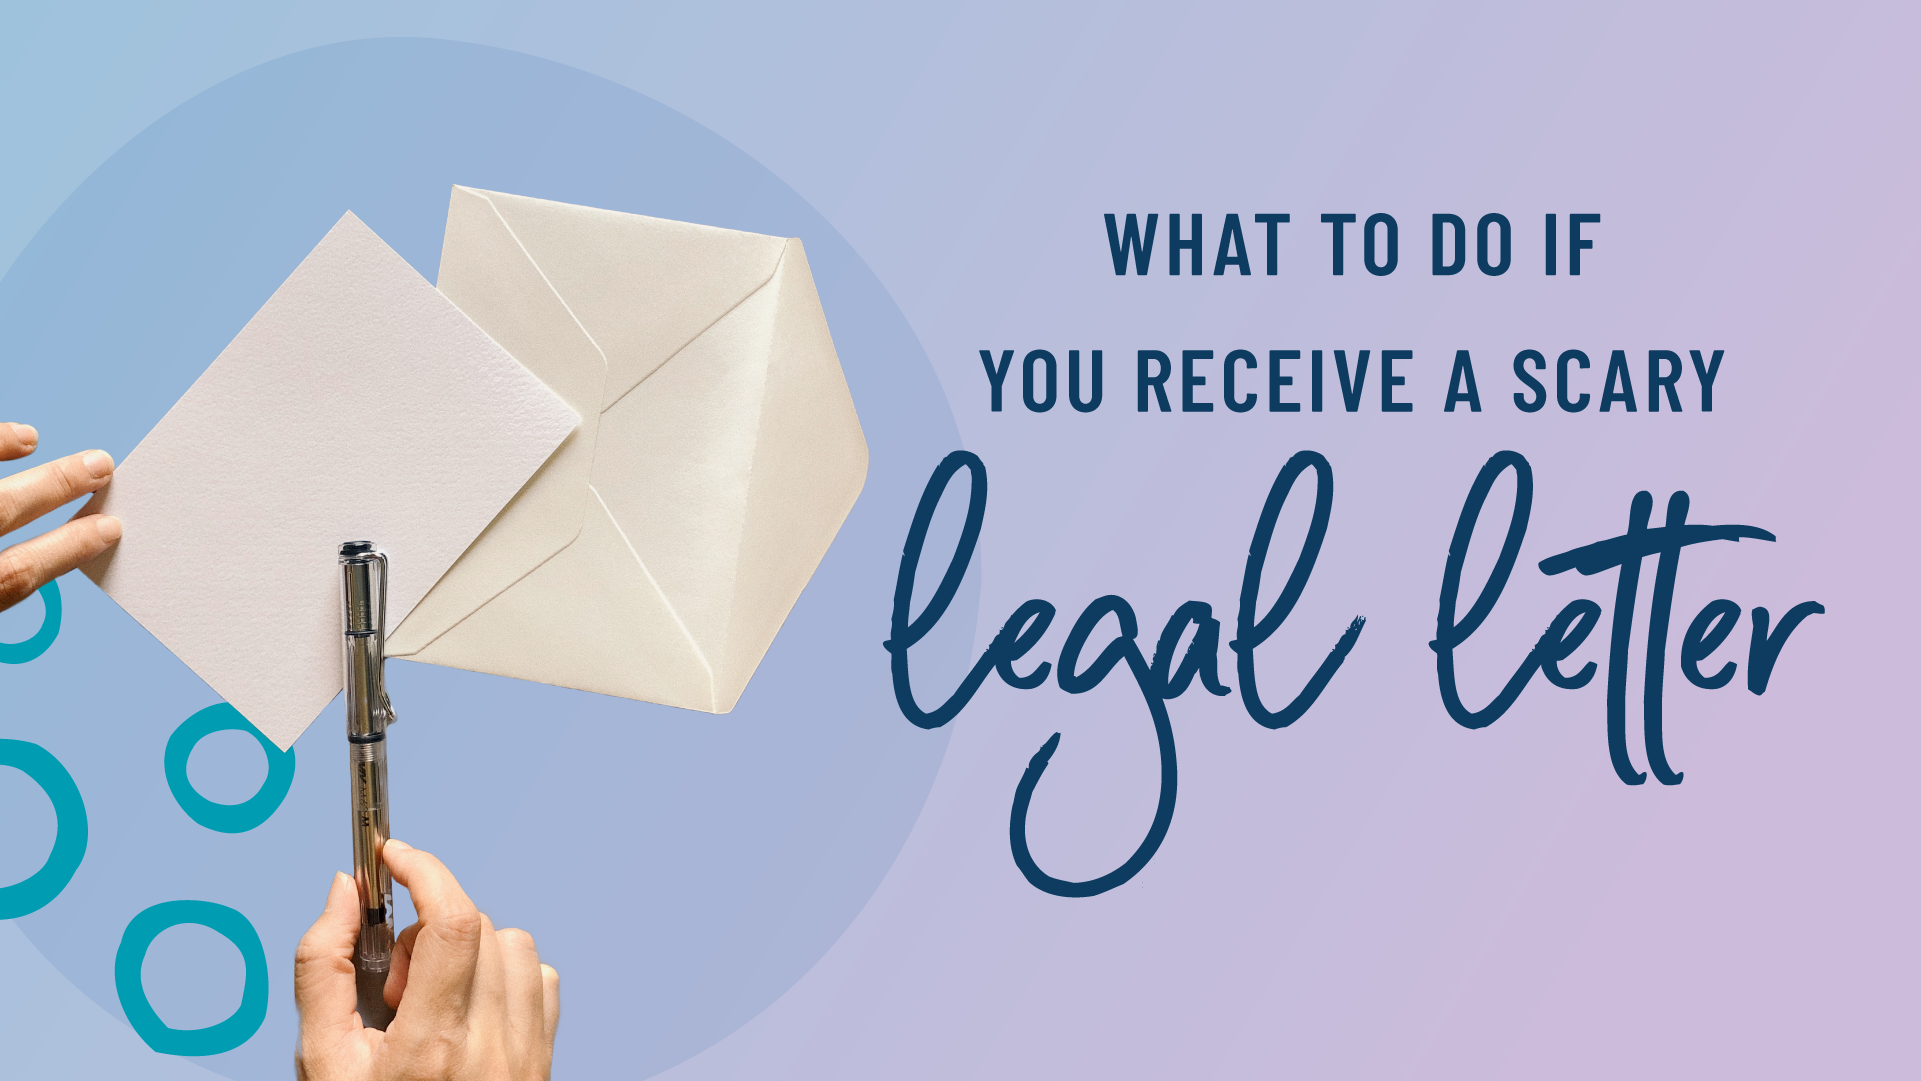 What Should You Do if You Receive a Scary Legal Letter?